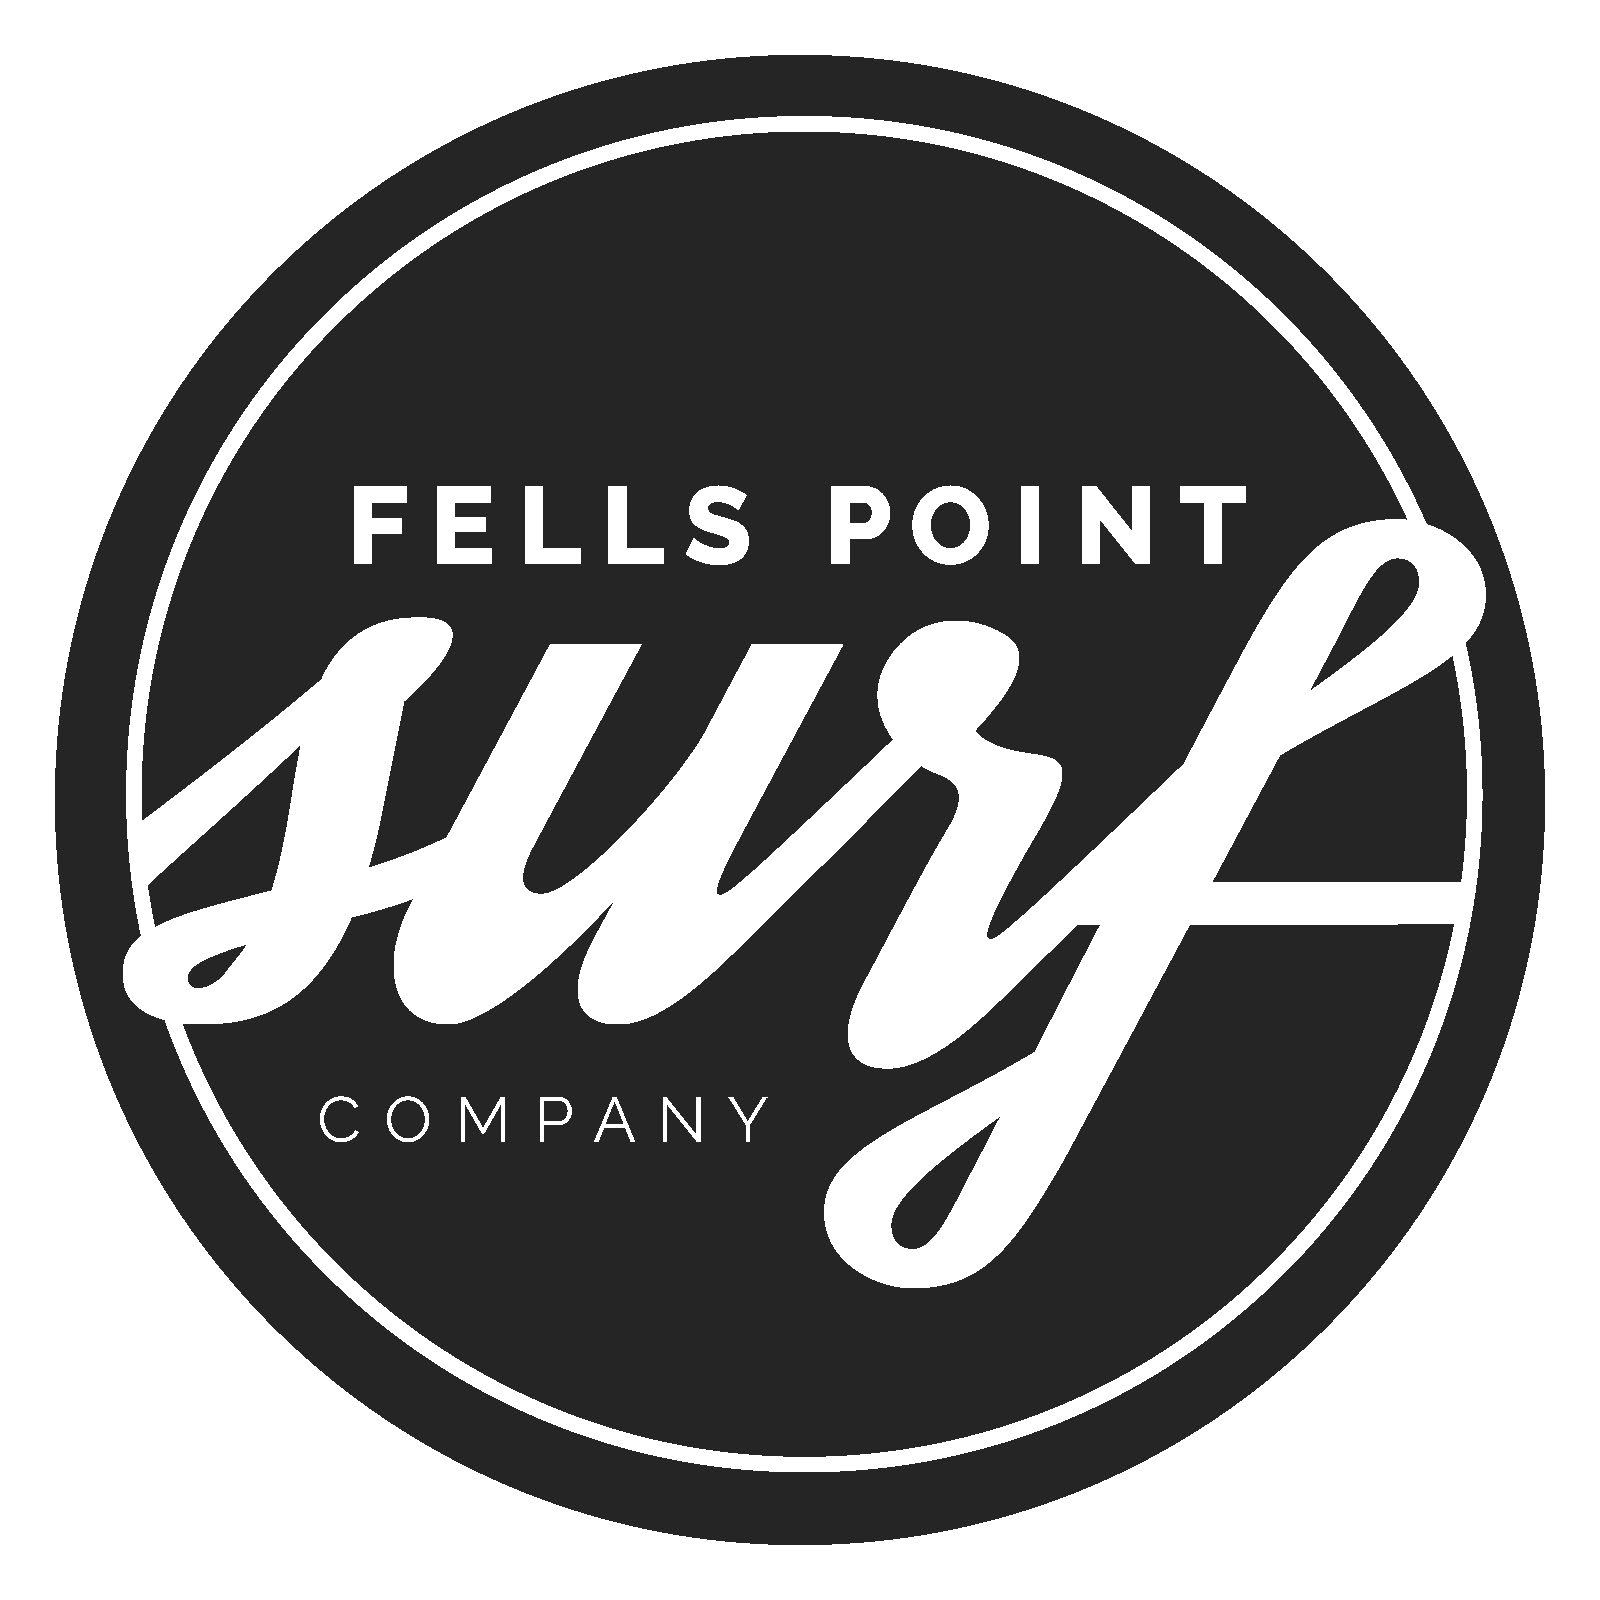 the logo for fell's point surf company